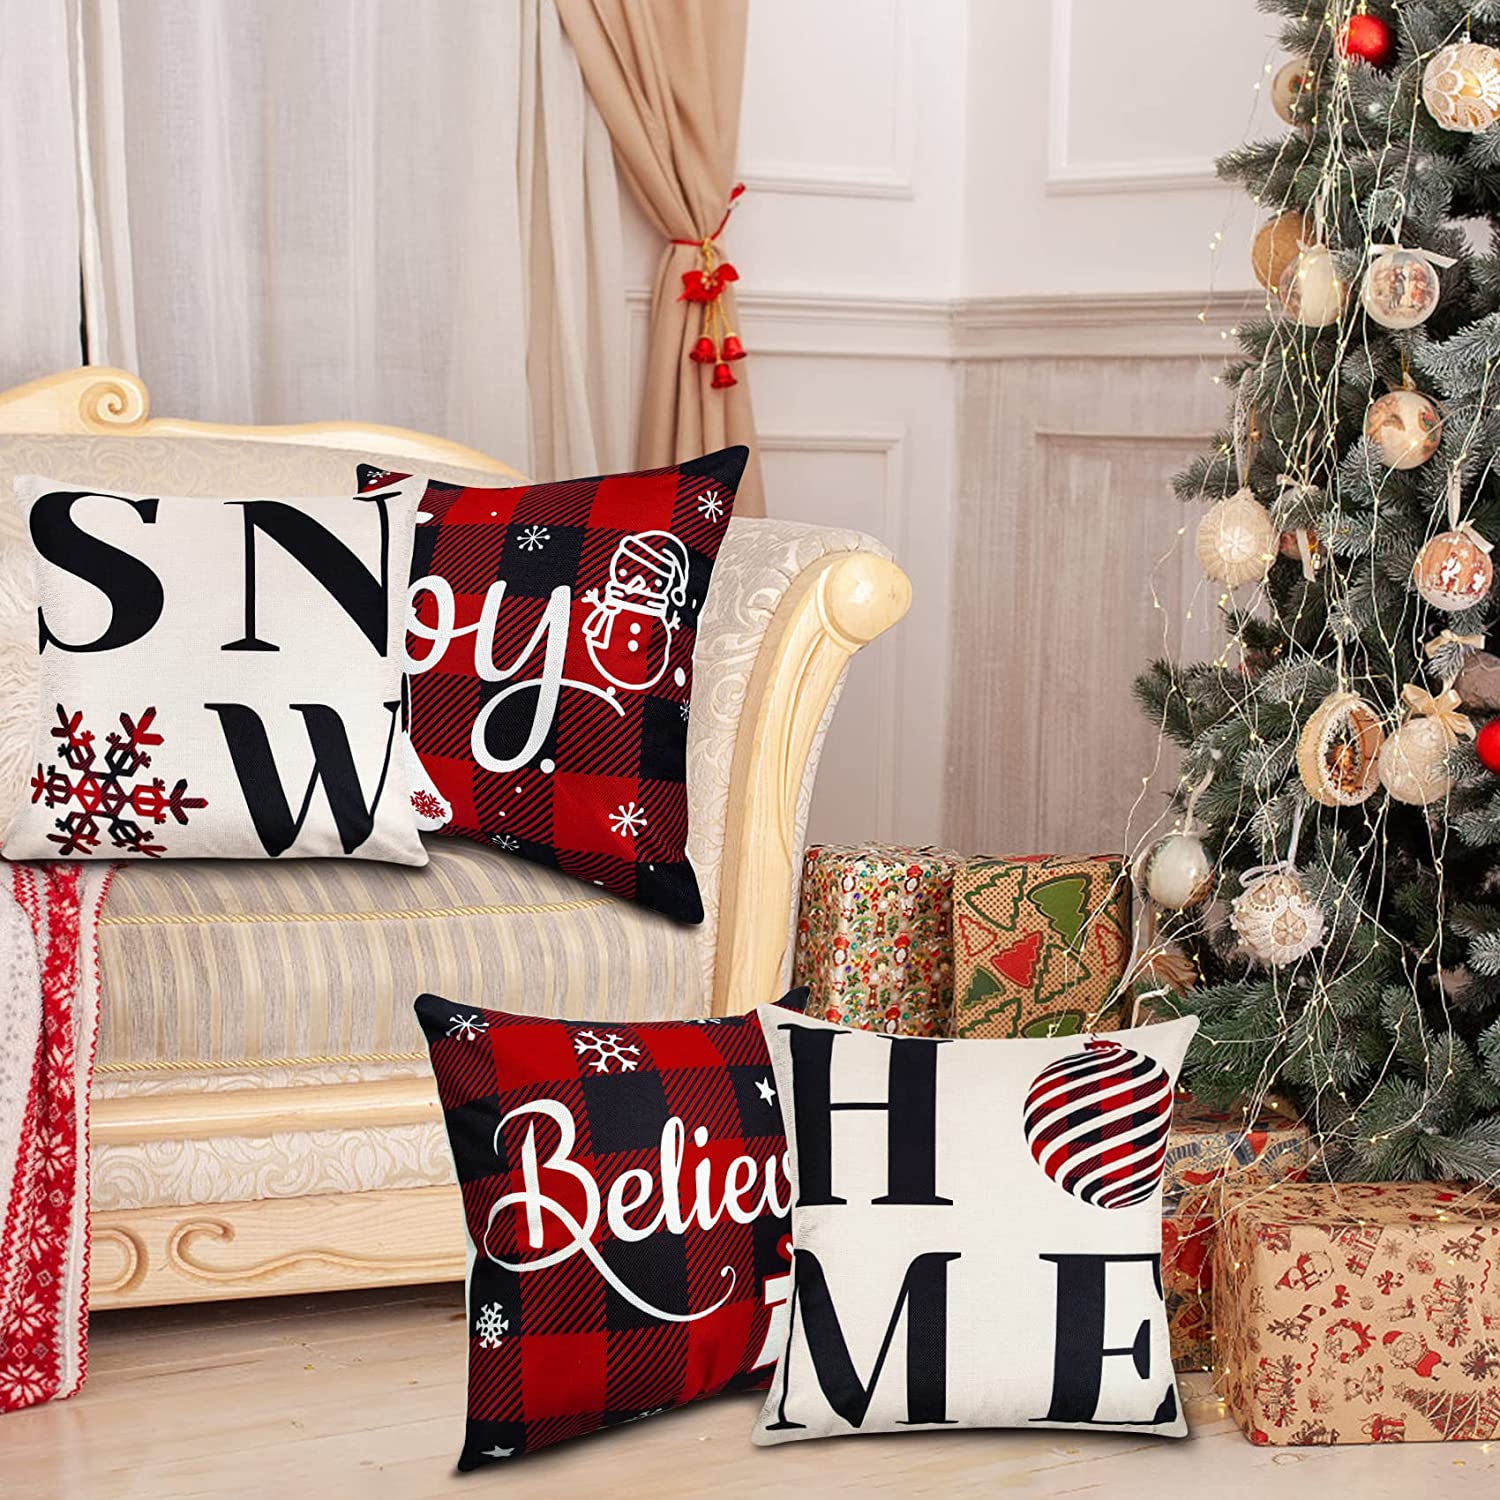 Ouddy Home Christmas Pillow Covers 18x18 Set of 4, Buffalo Plaid Christmas Throw Pillows Cases - Click Image to Close